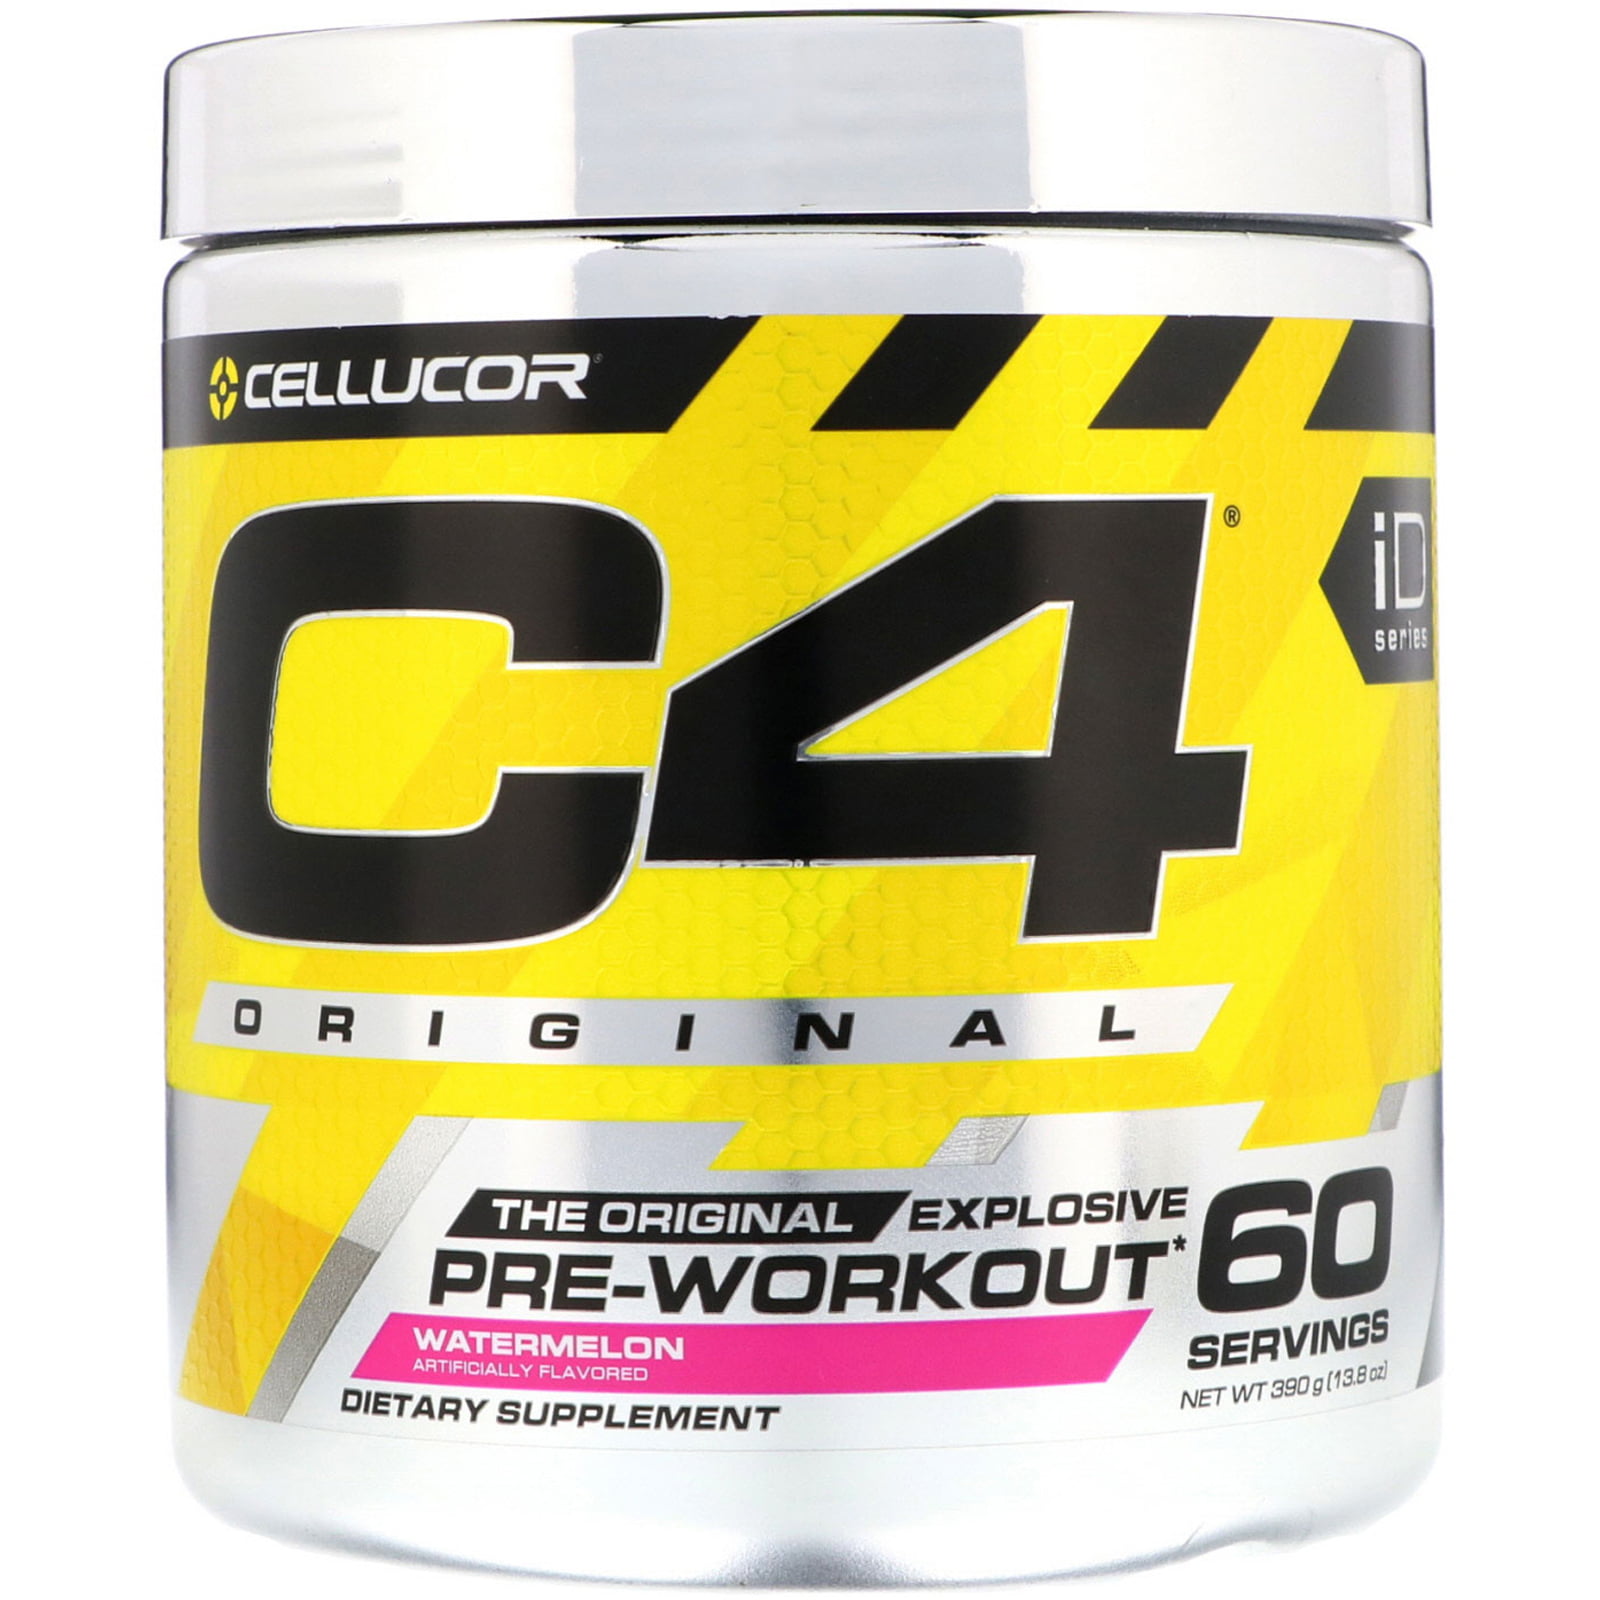 5 Day C4 Pre Workout for Women